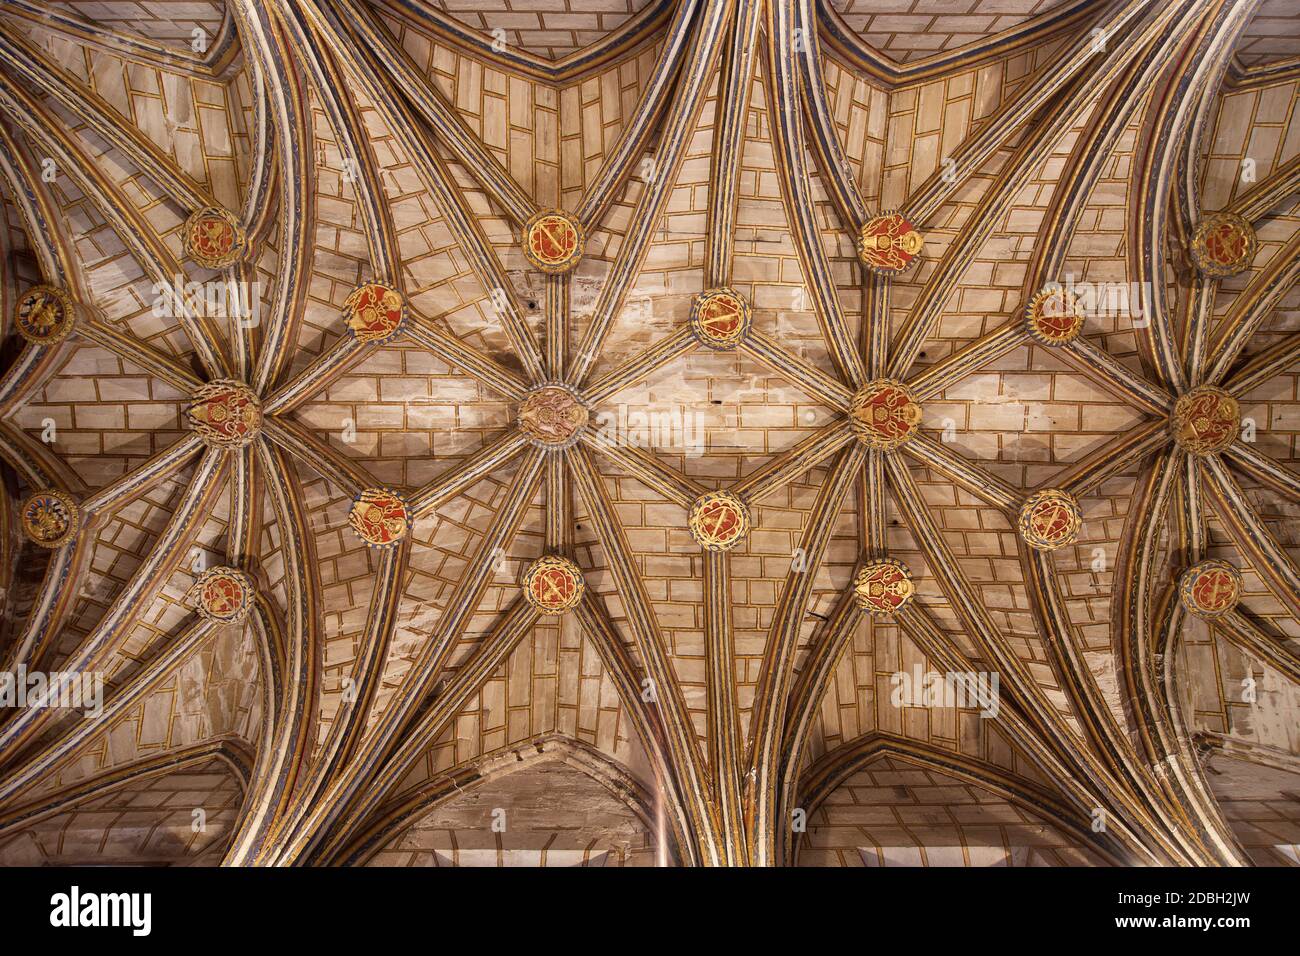 Vaulted Ceiling of the Cathedral of Santa Maria in Cuenca, Spain. Stock Photo